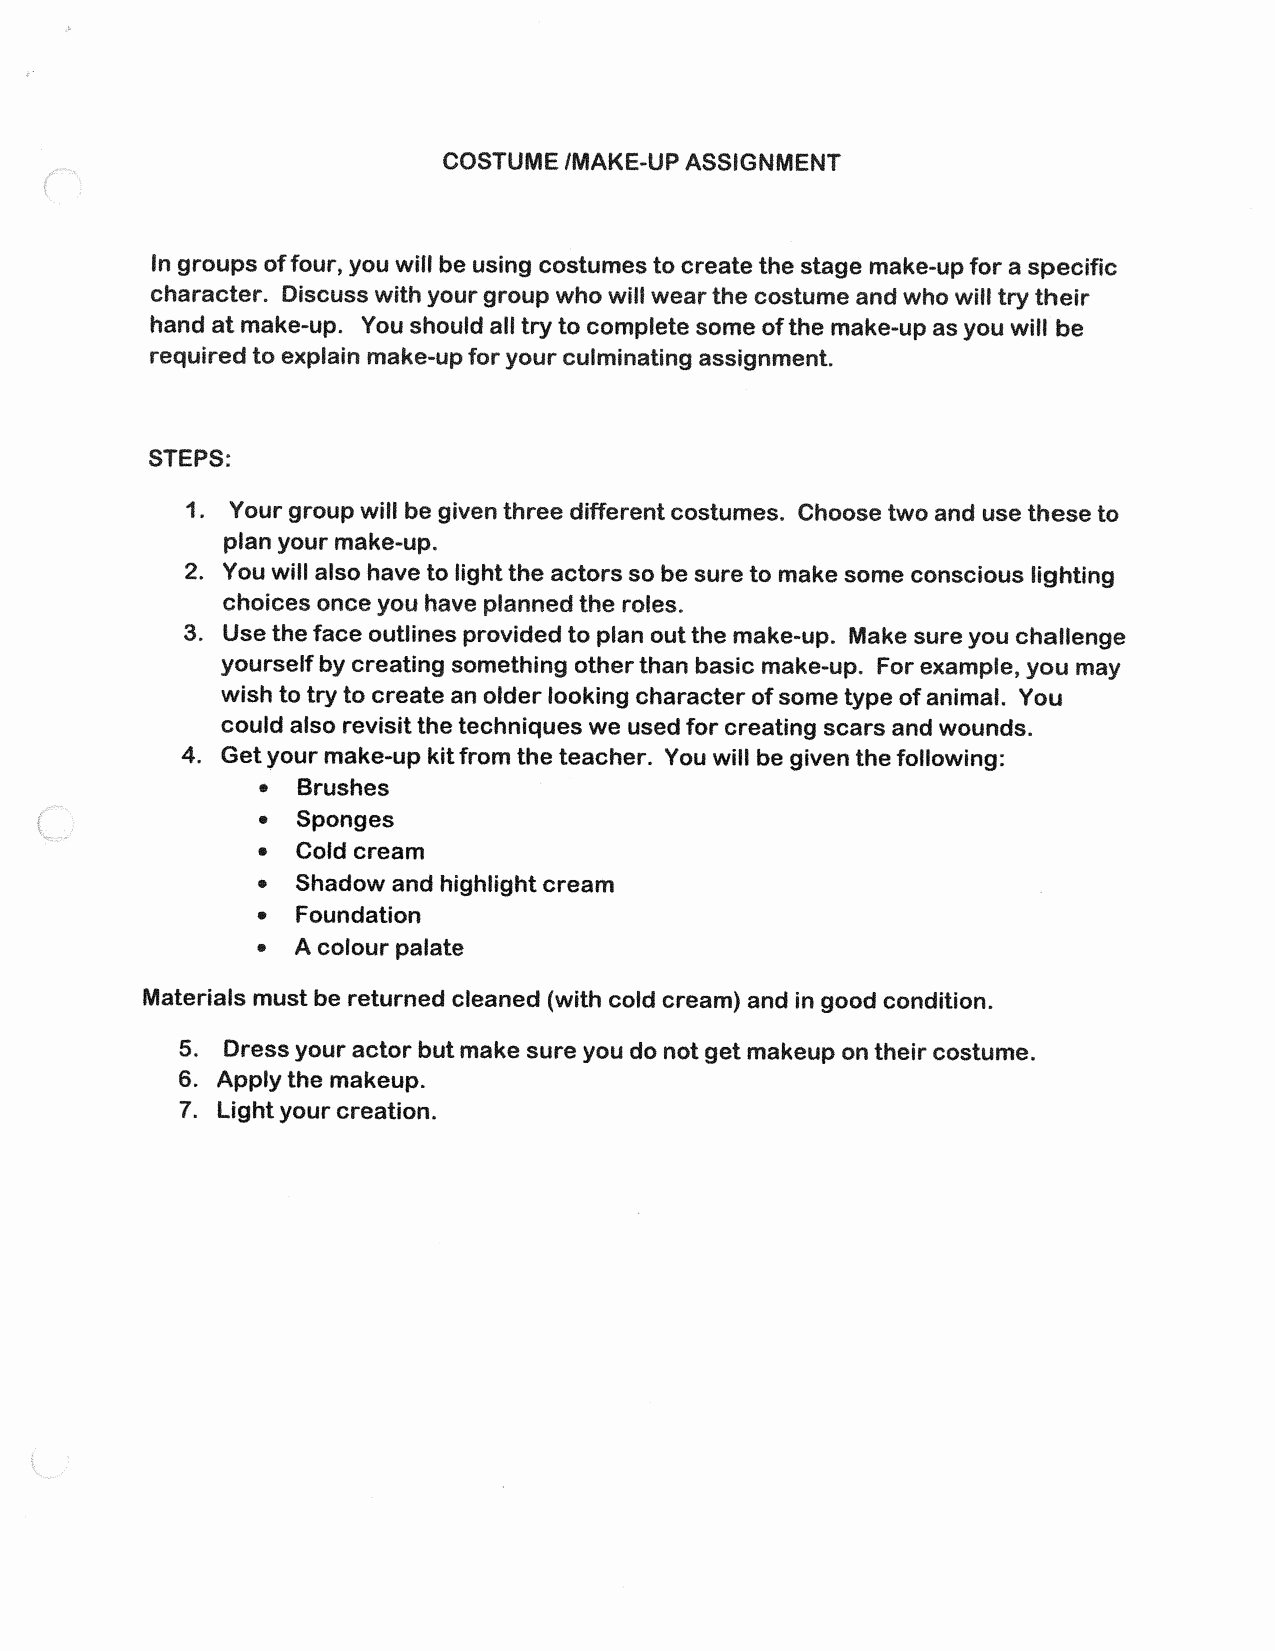 Tech theatre Resume Template Beautiful This is A Group assignment for Students Involved In A theatre Tech or Production Course